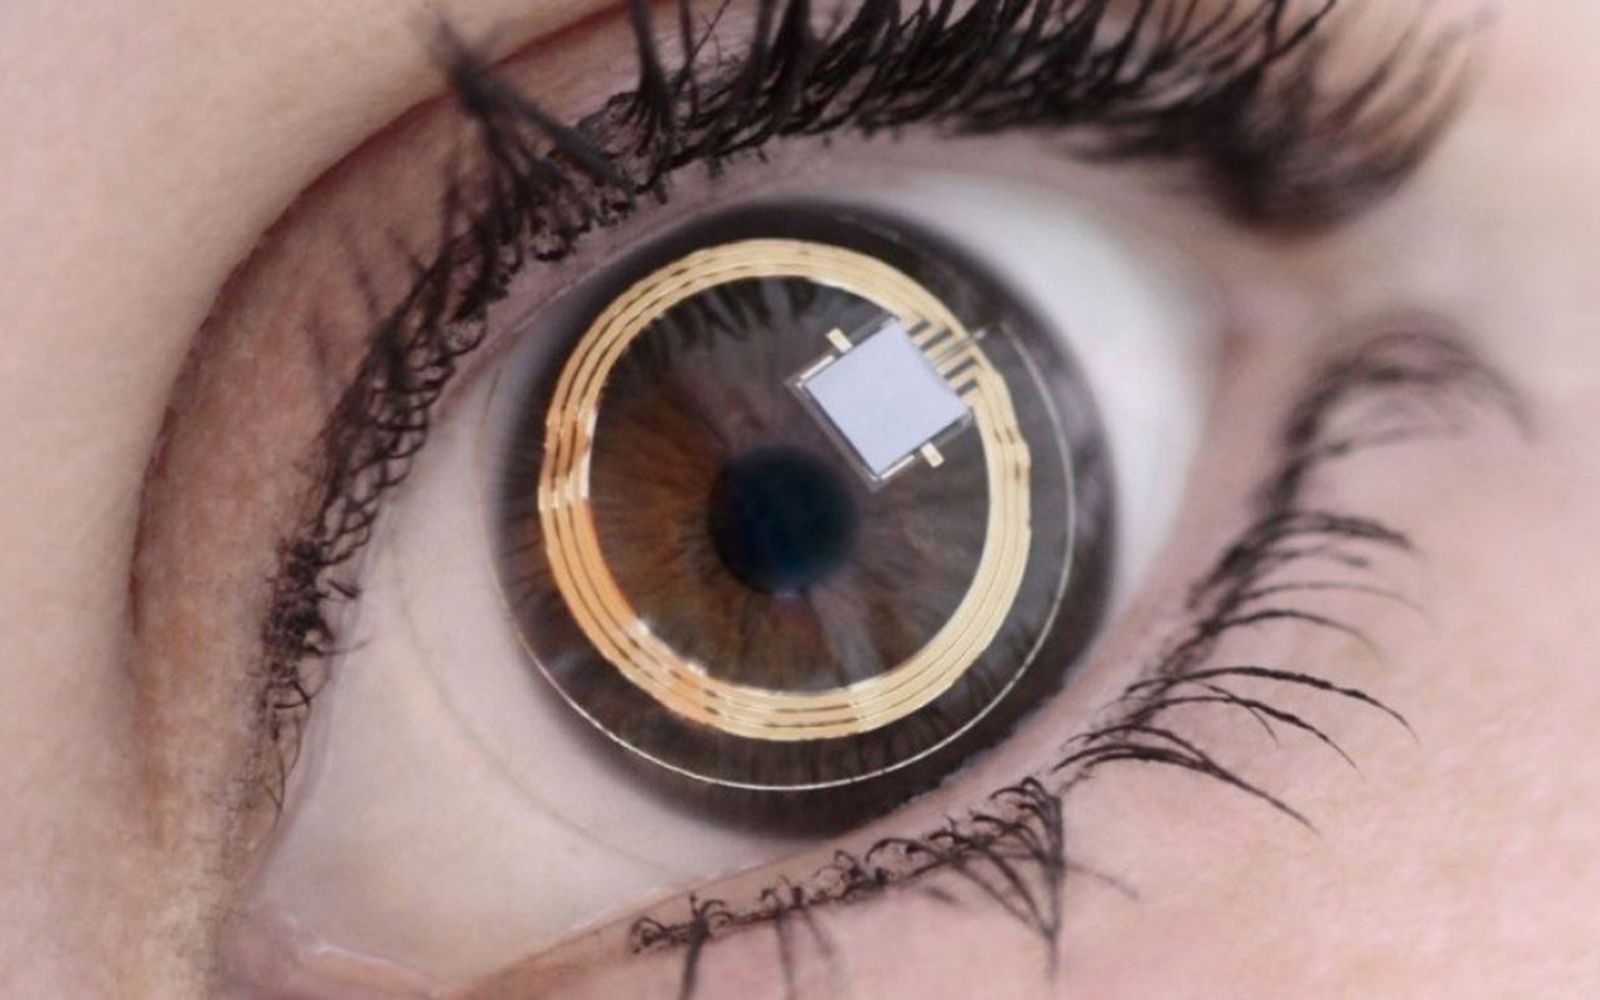 Samsung contact lens displays put video and cameras in your